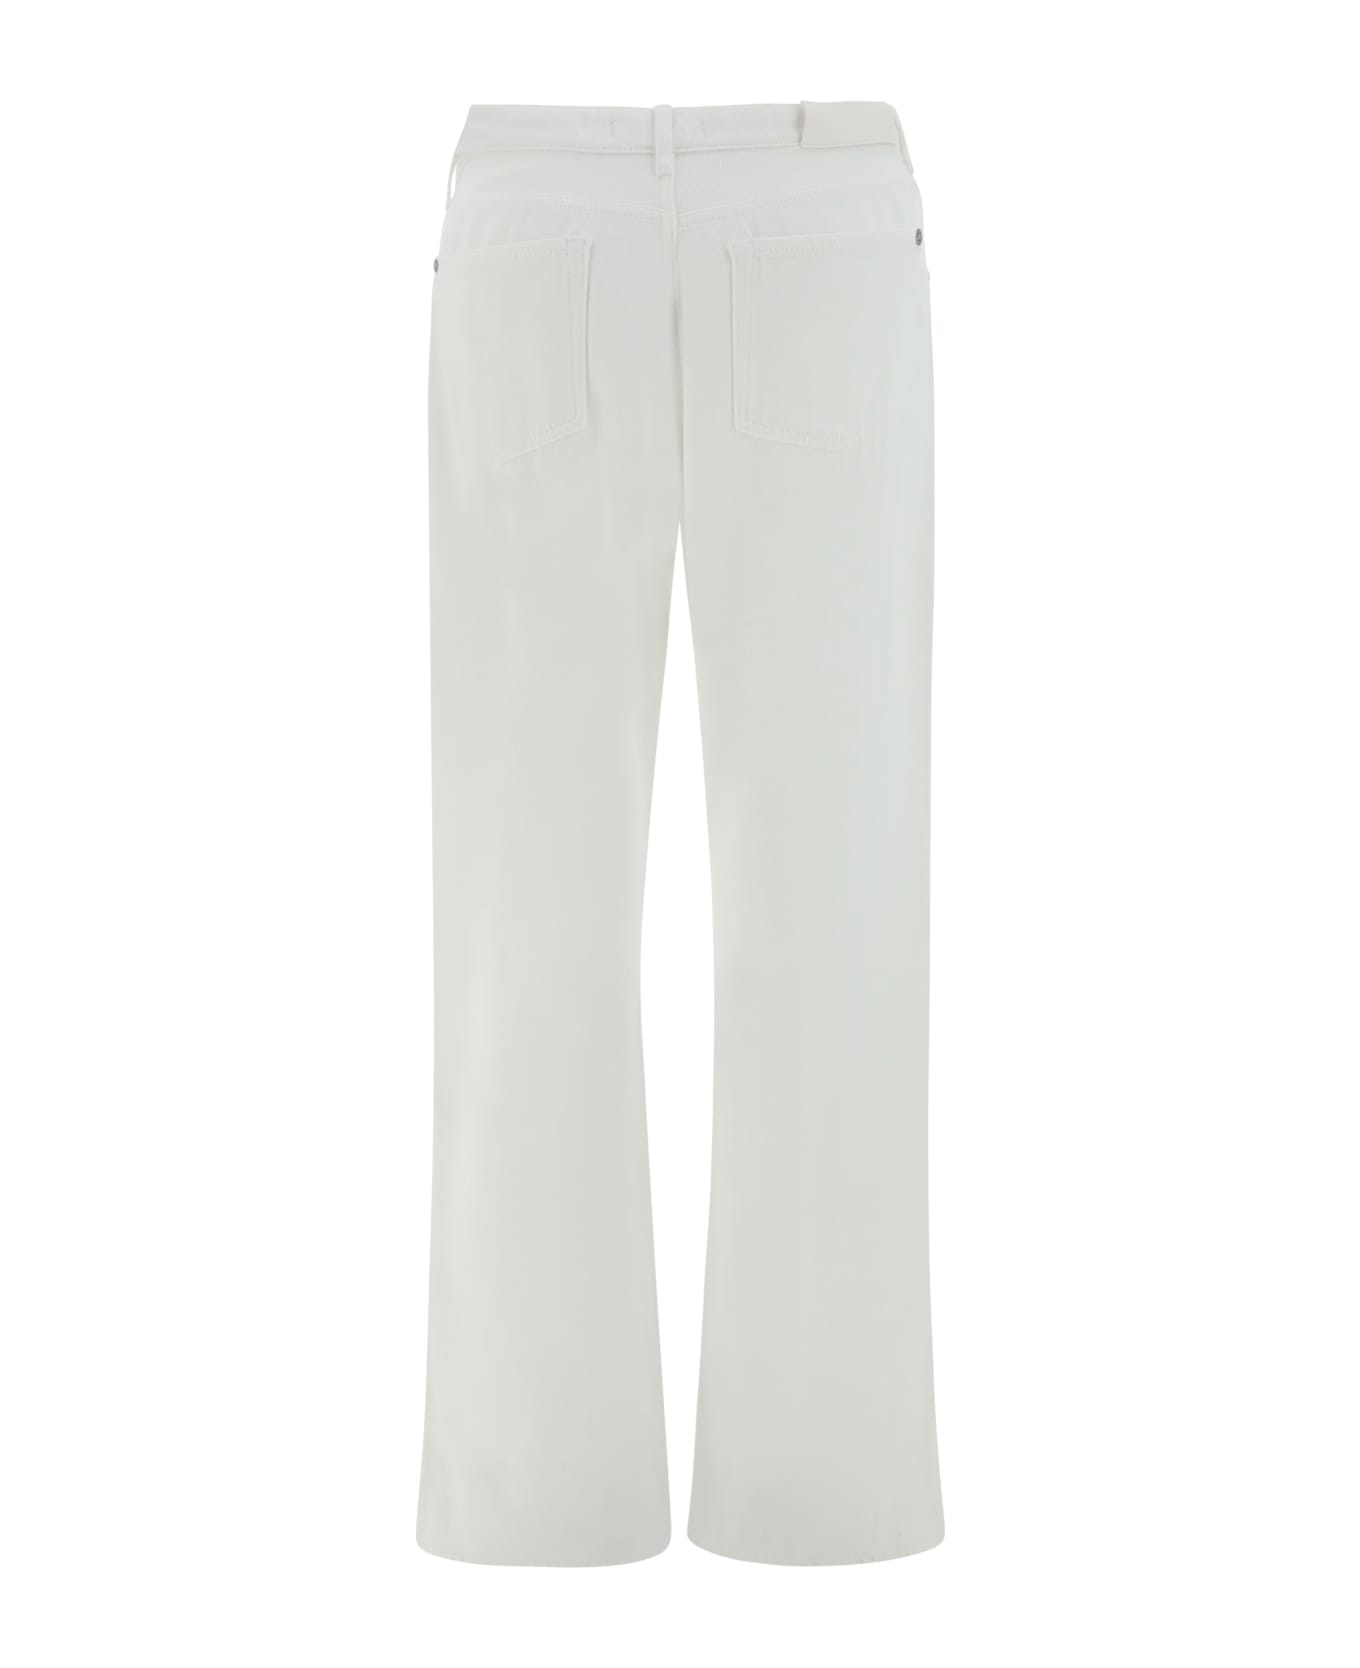 7 For All Mankind Pants - White